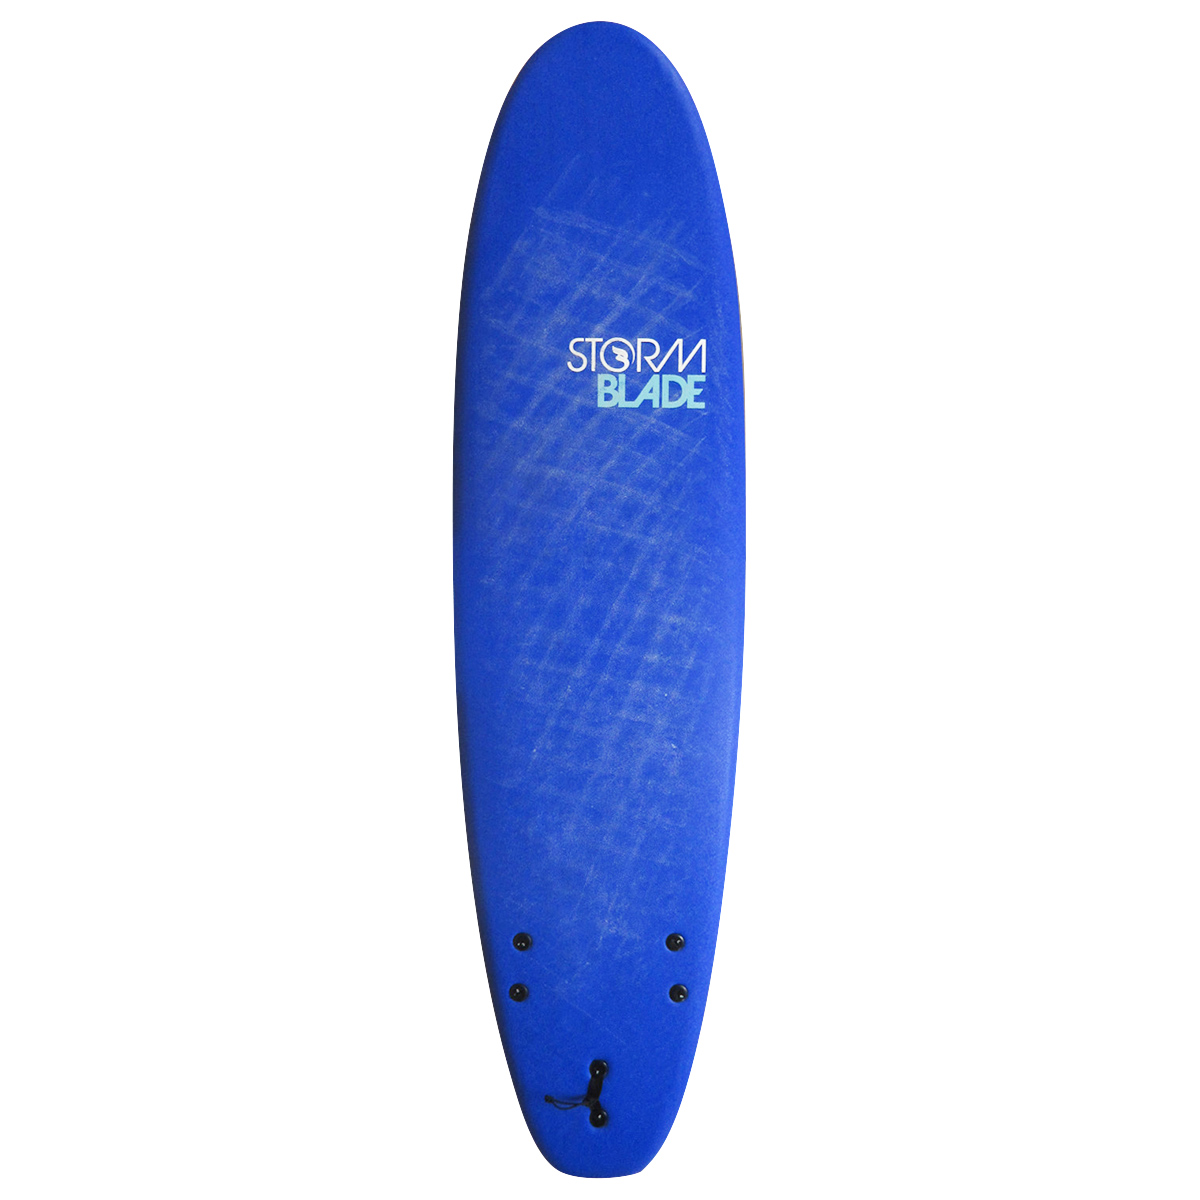 STOME BLADE / FUNBOARD 7ft